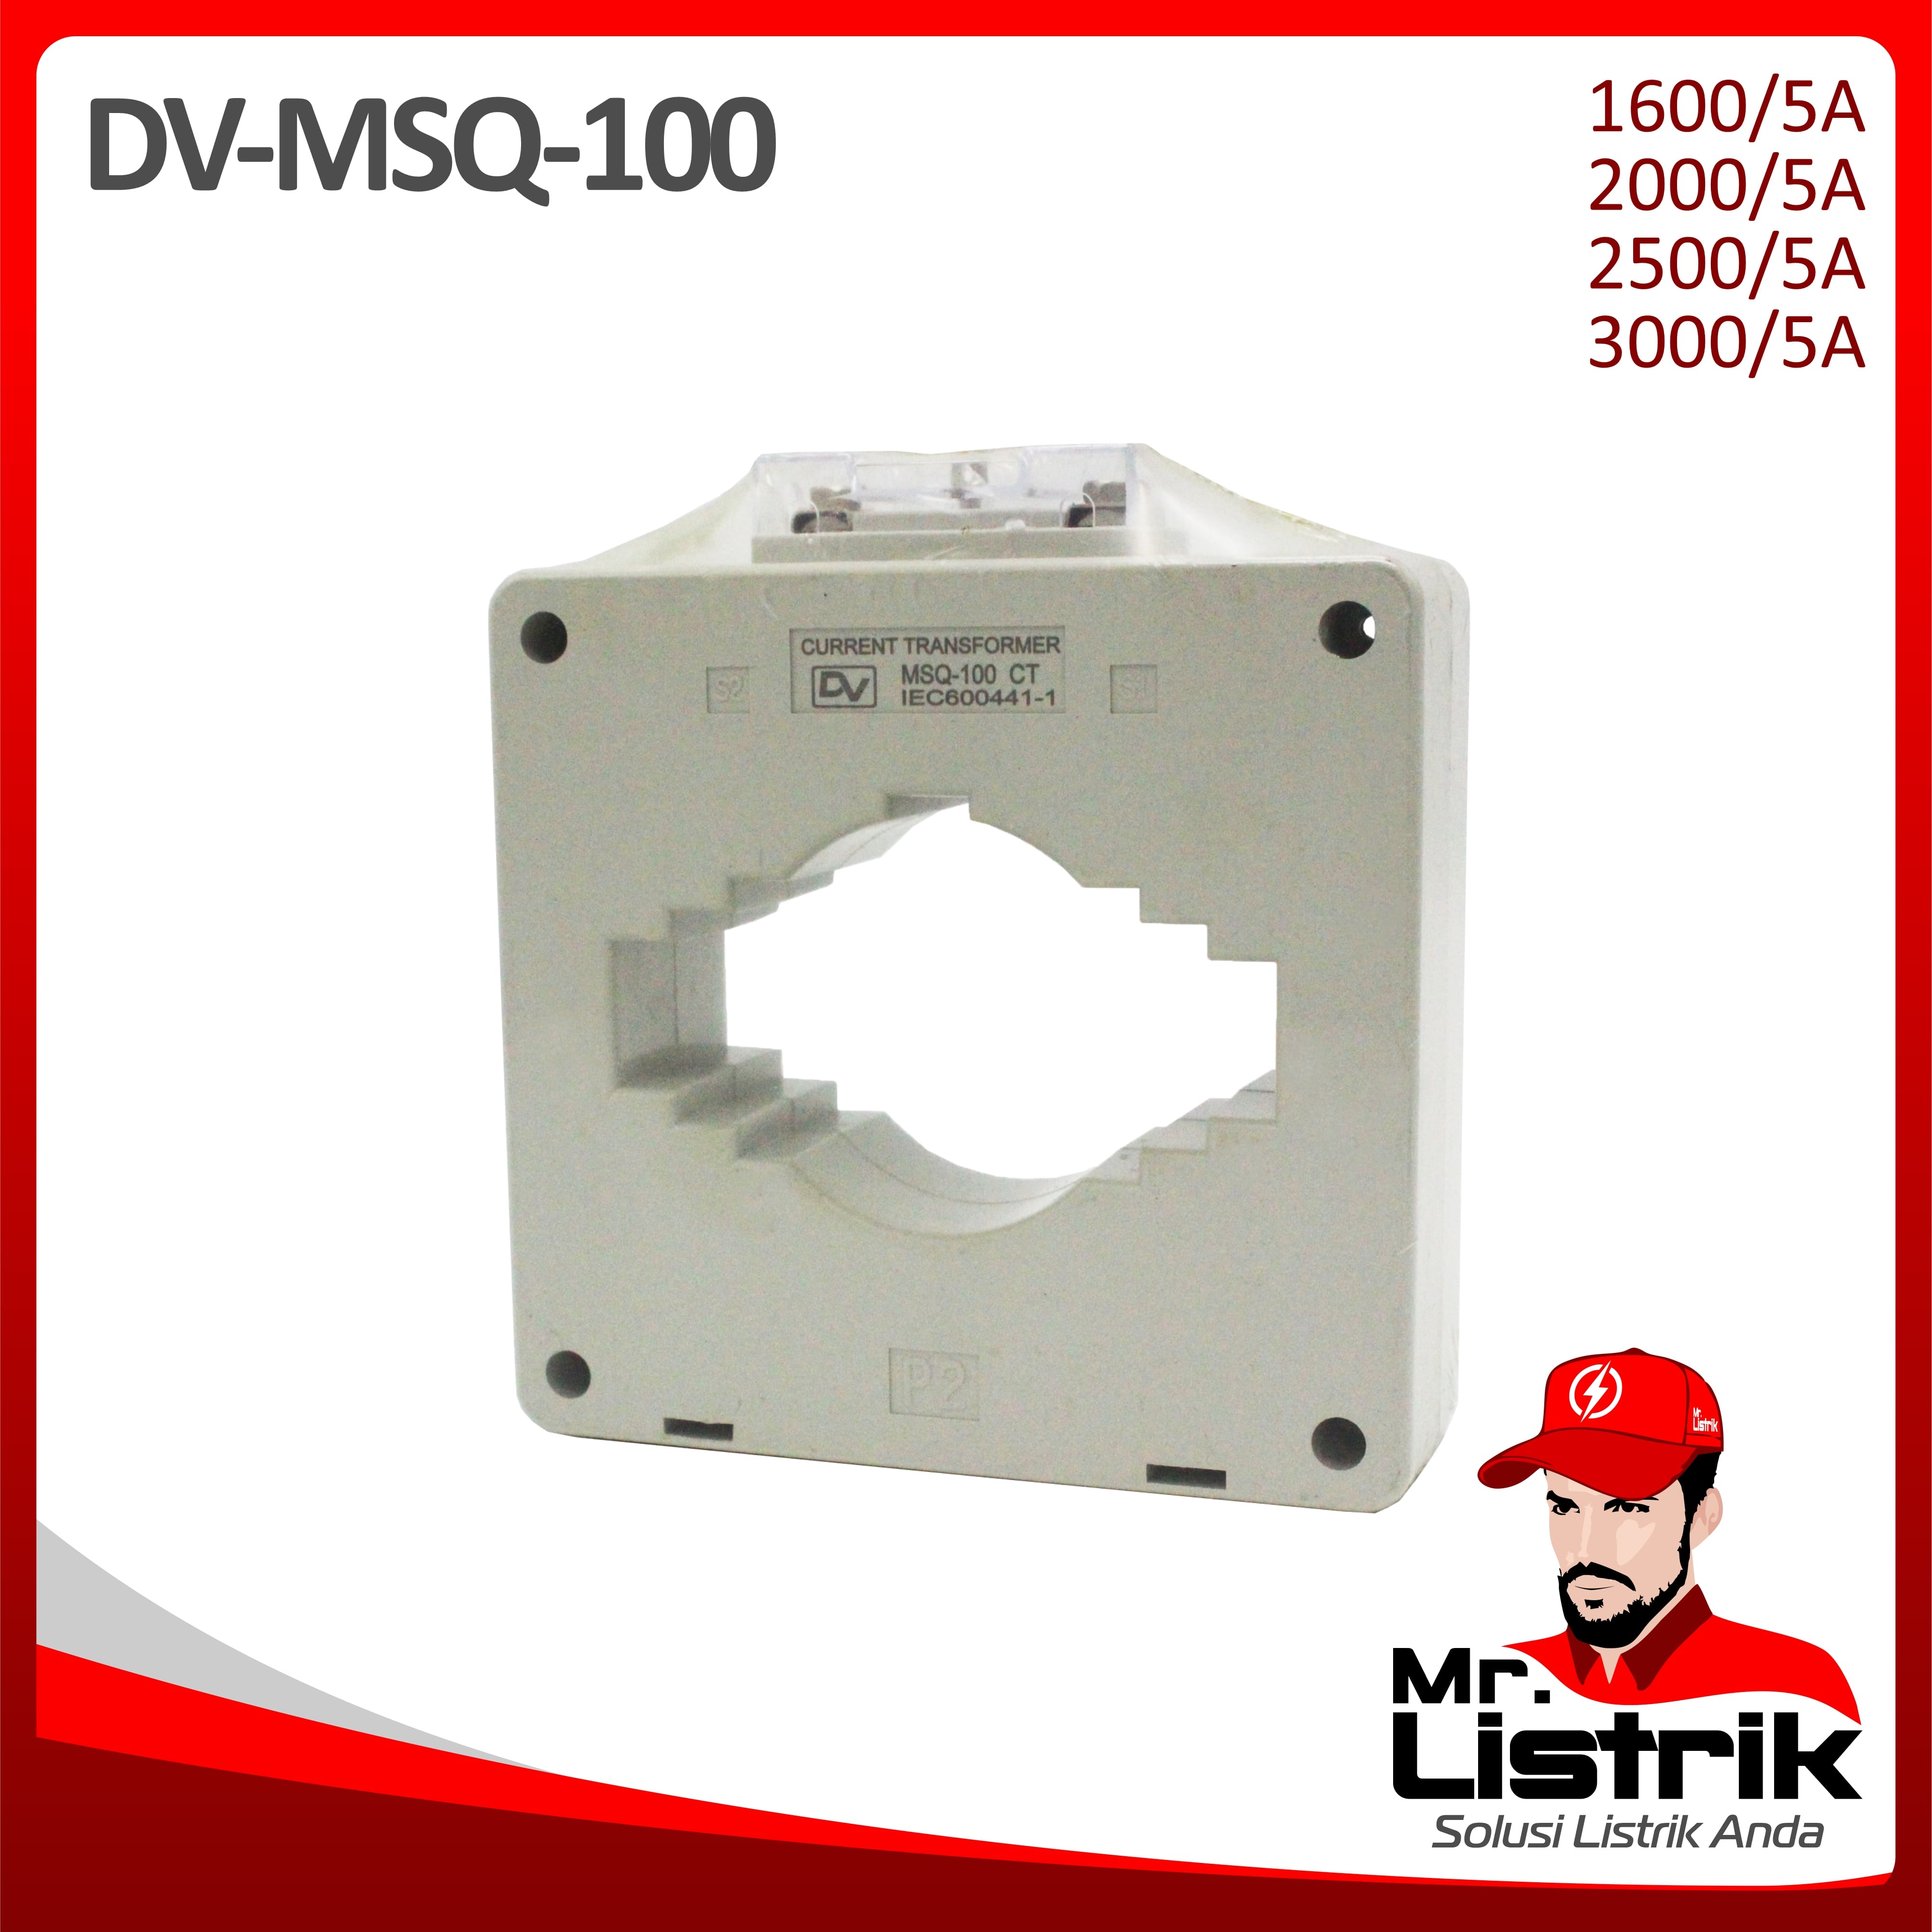 Current Transformer DV Fixed Type MSQ-100 2000/5A